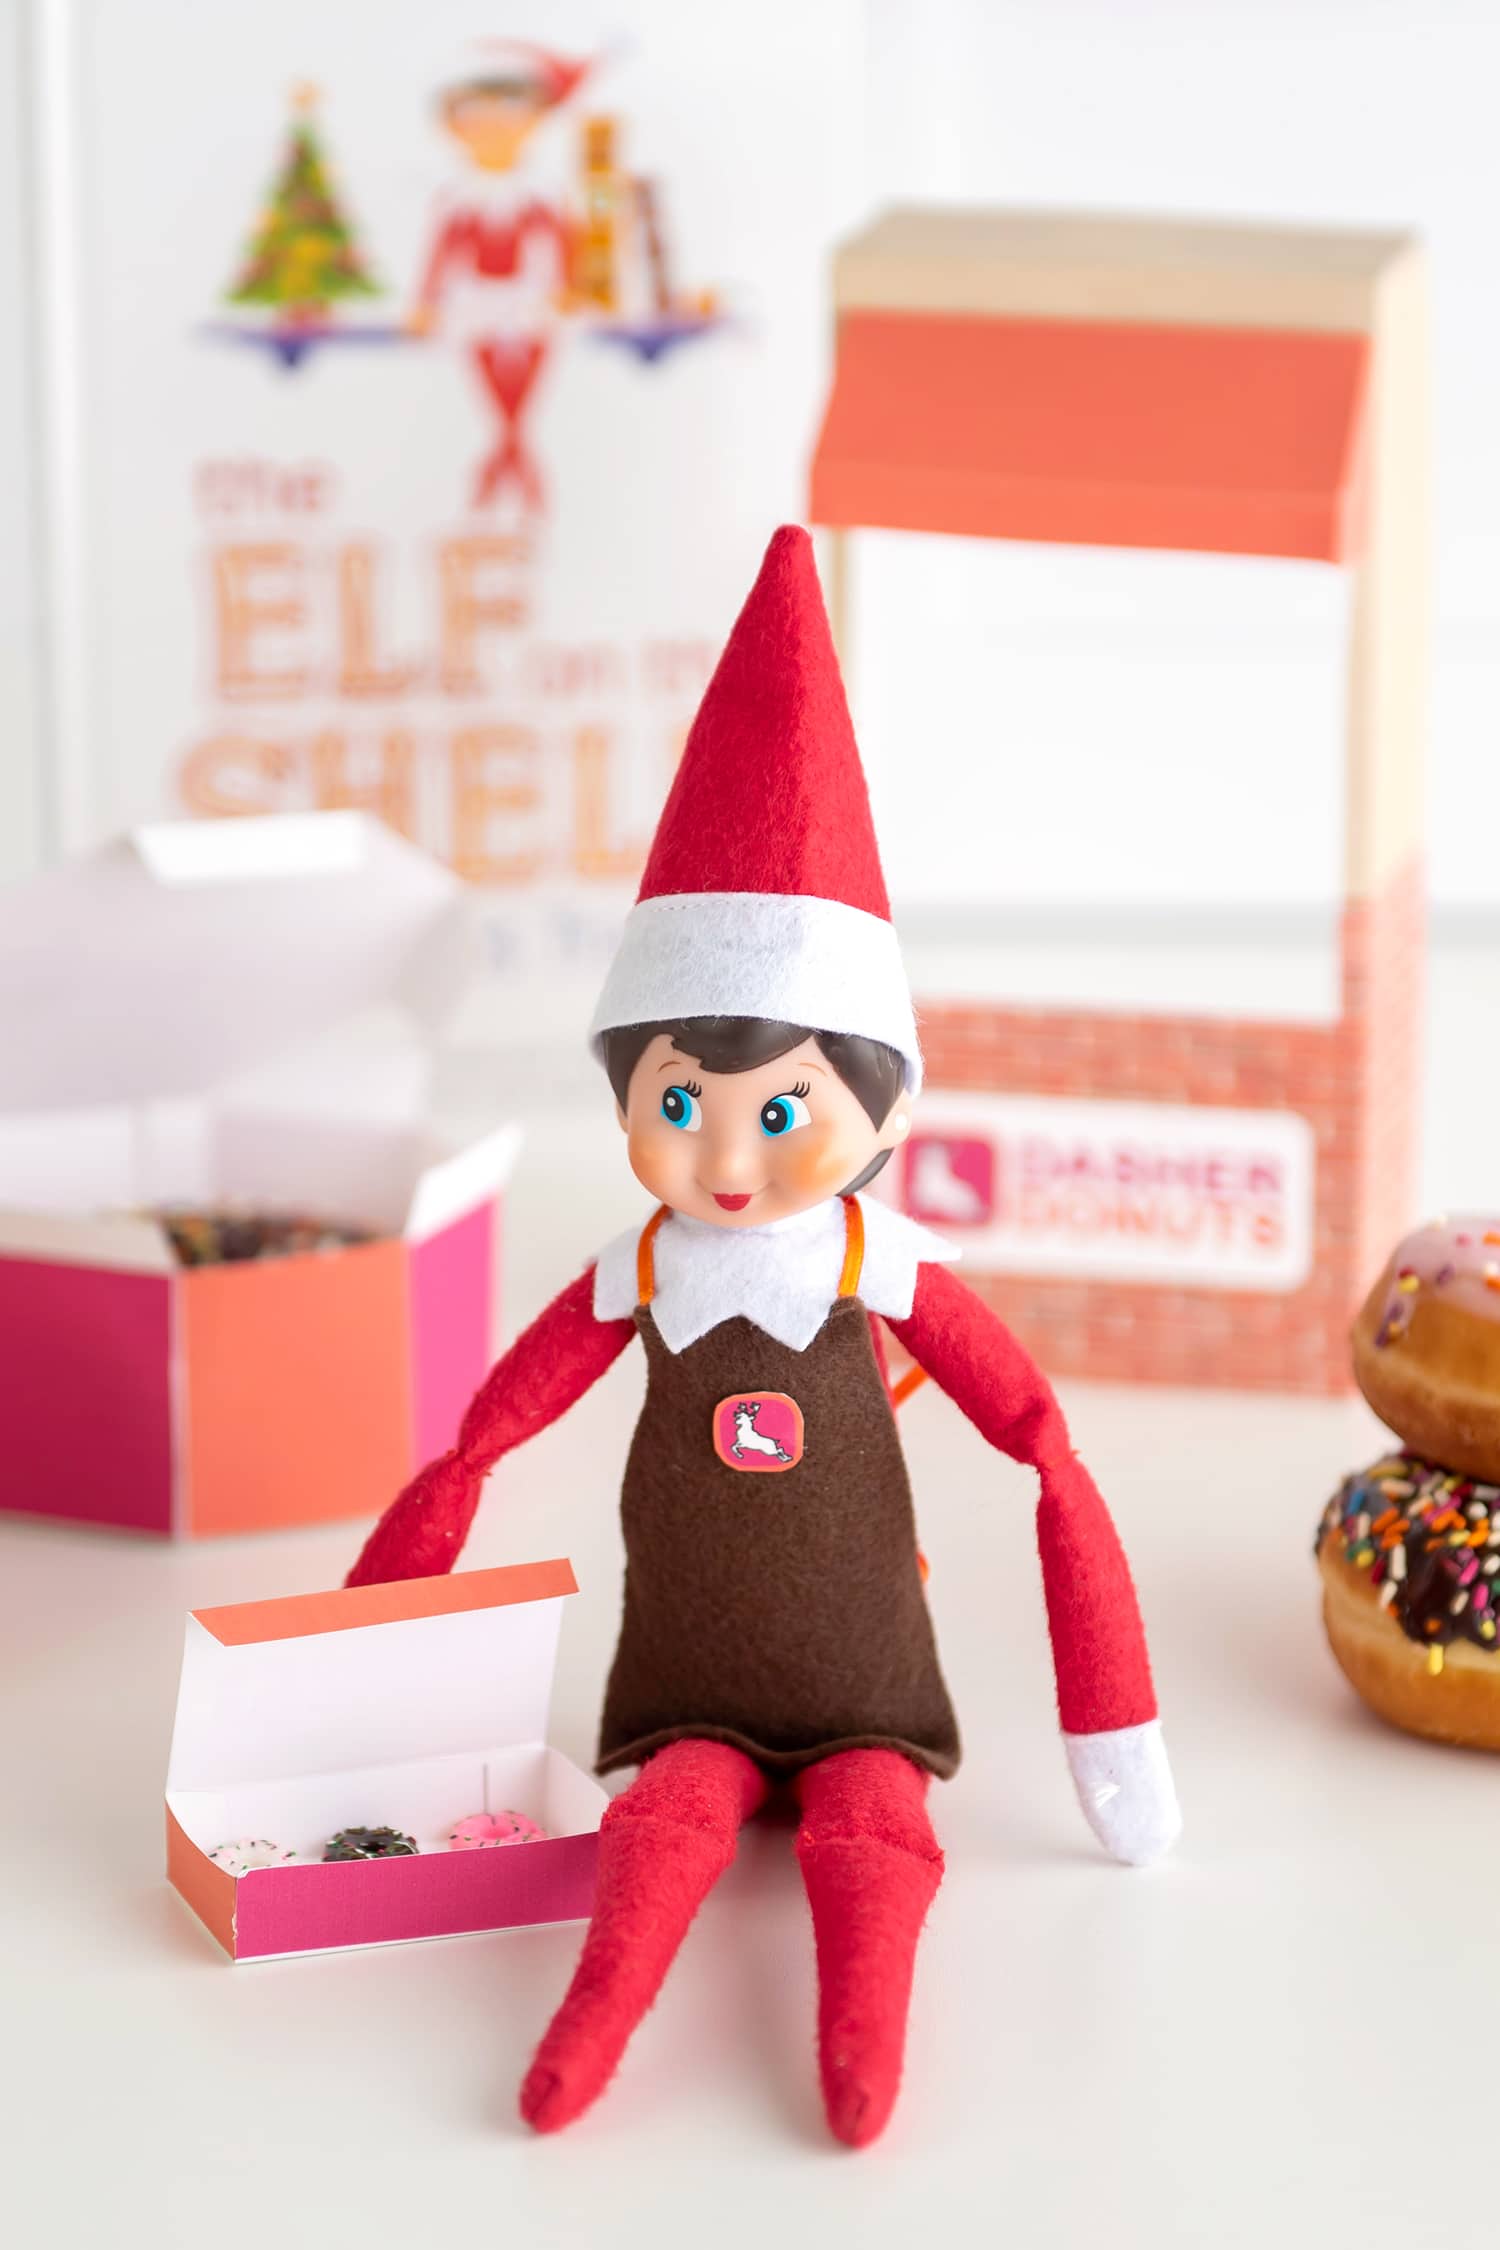 Girl Elf on the Shelf doll wearing an apron and sitting with a box of faux mini donuts